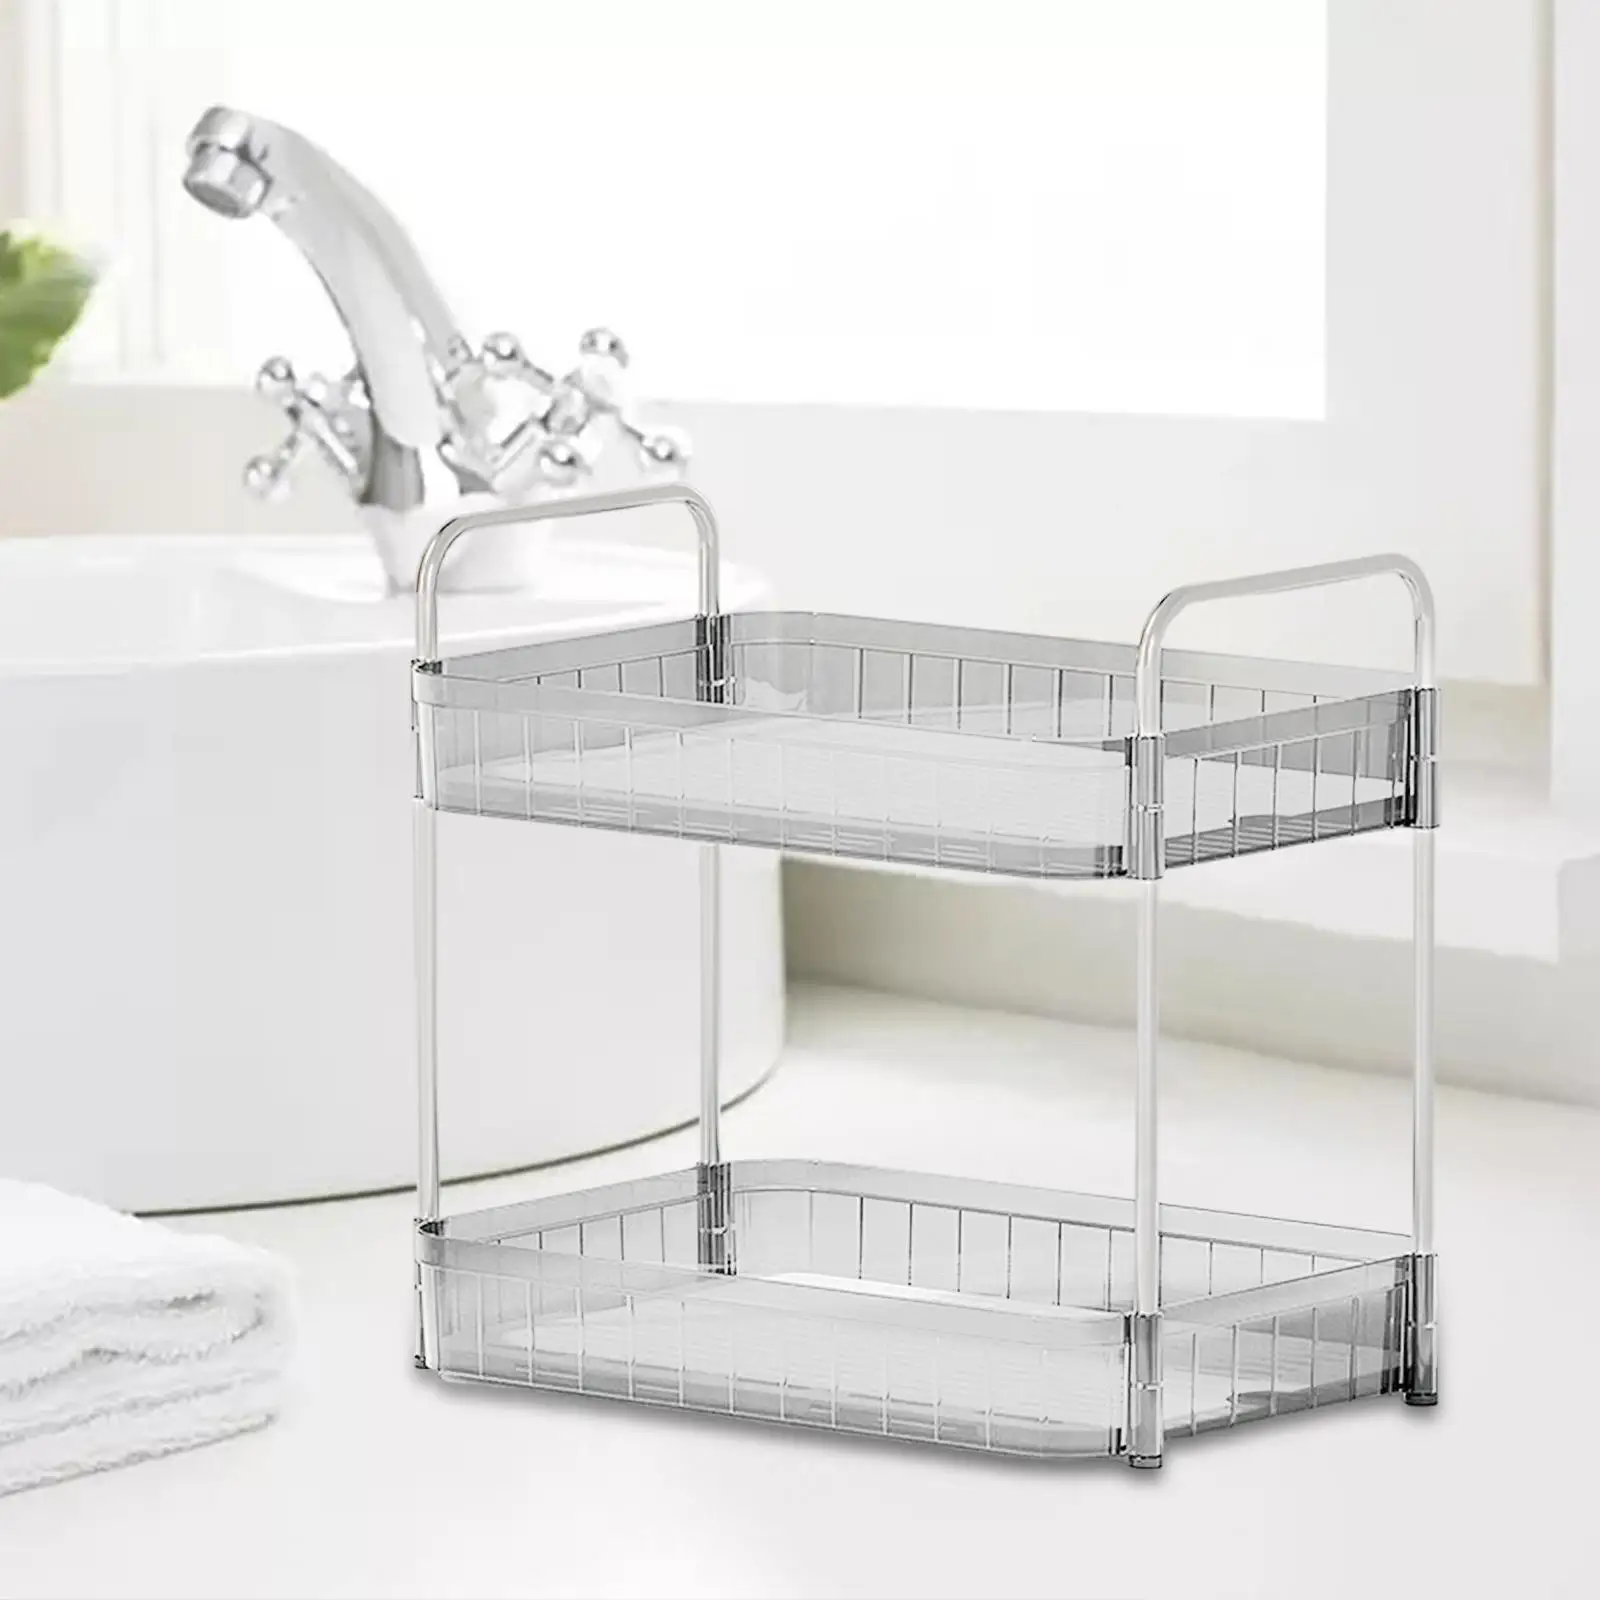 Drain Rack 2 Tier Makeup Caddy Stainless Steel Pipe for Table Bedroom Office